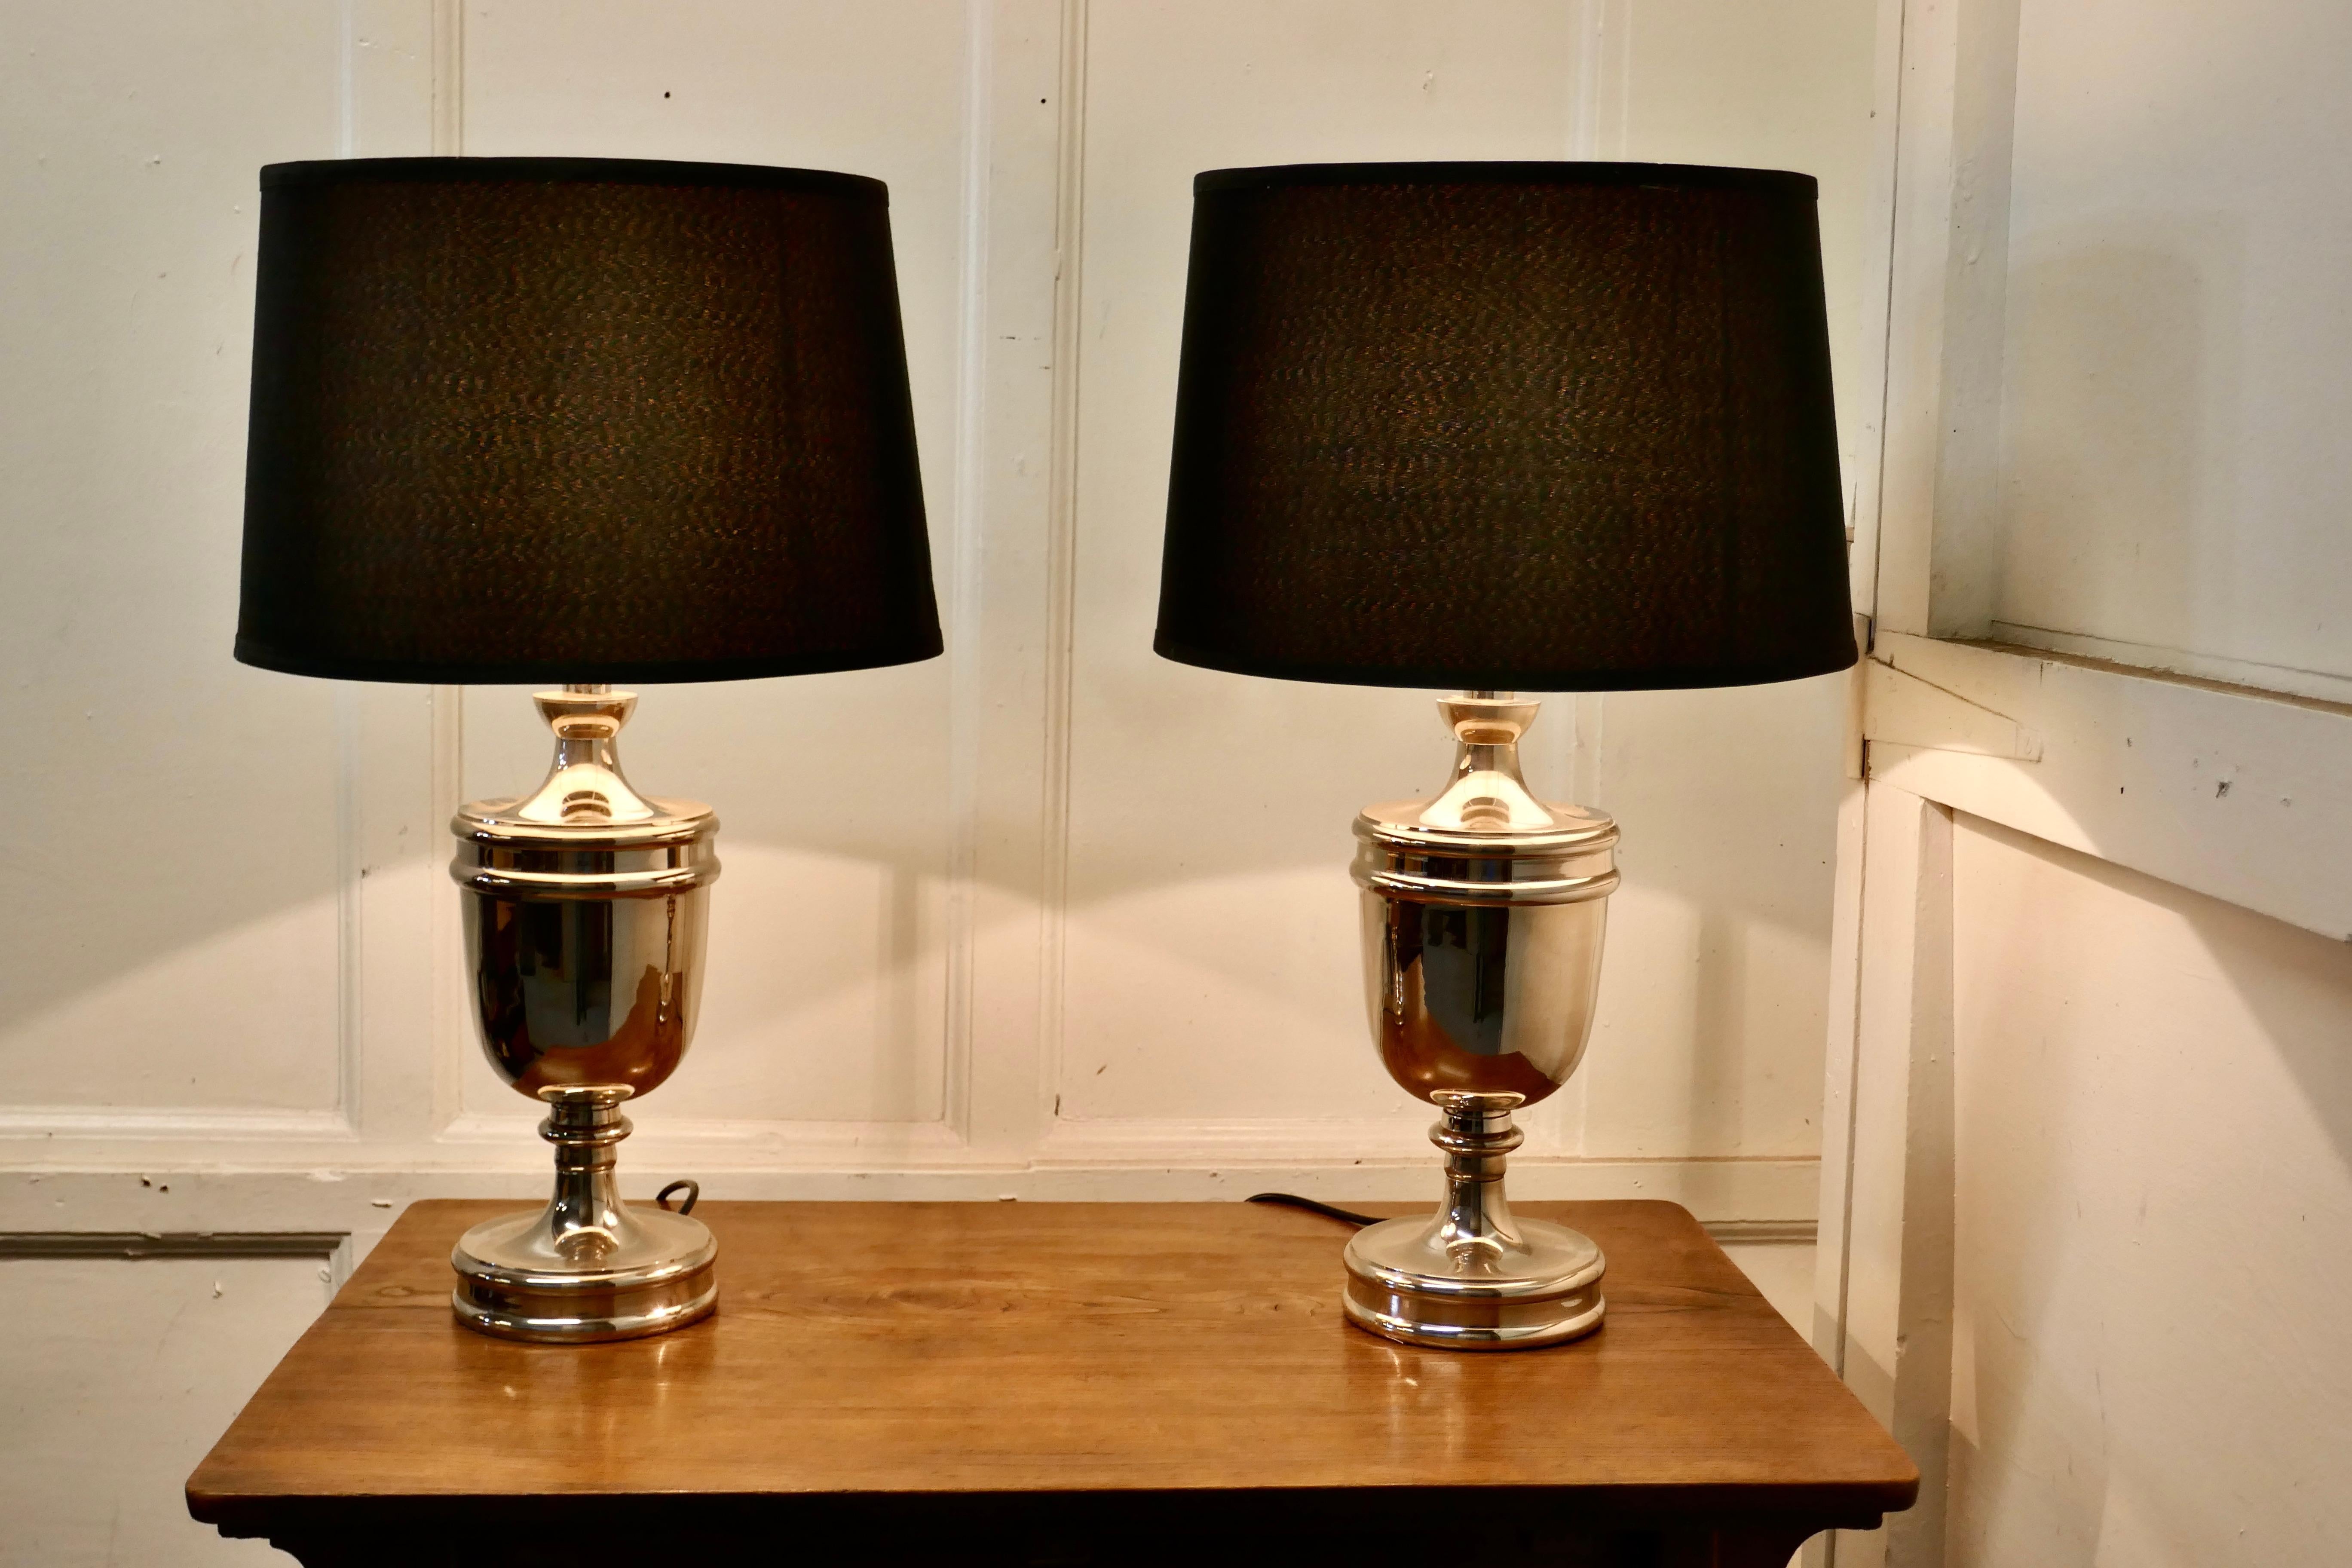 A pair of large Art Deco style chrome table lamps with black shades

These large stunning lamps have a chrome urn shaped base and large black fabric shades, giving the pair an Art Deco look

The lamps are fully wired and in very good condition,